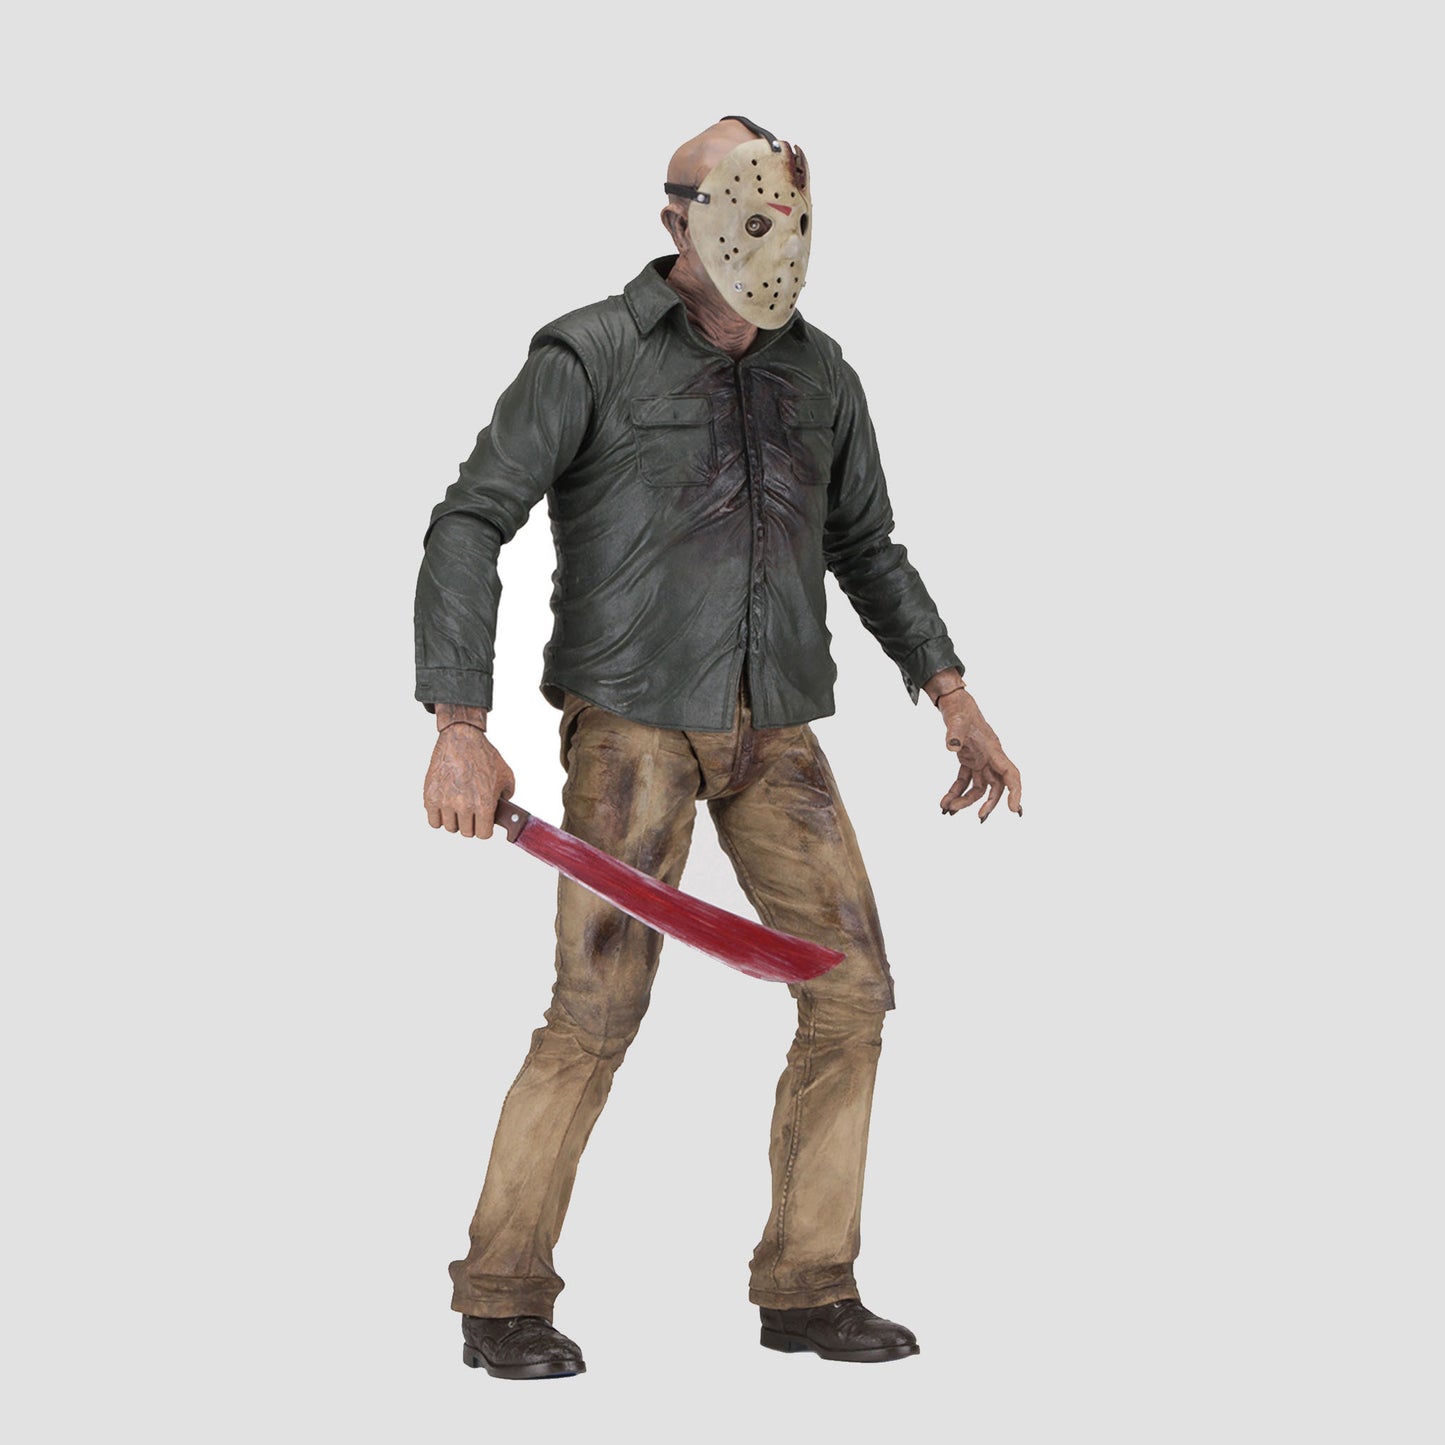 Jason Friday the 13th Part 4: The Final Chapter NECA 1:4 Scale Action Figure